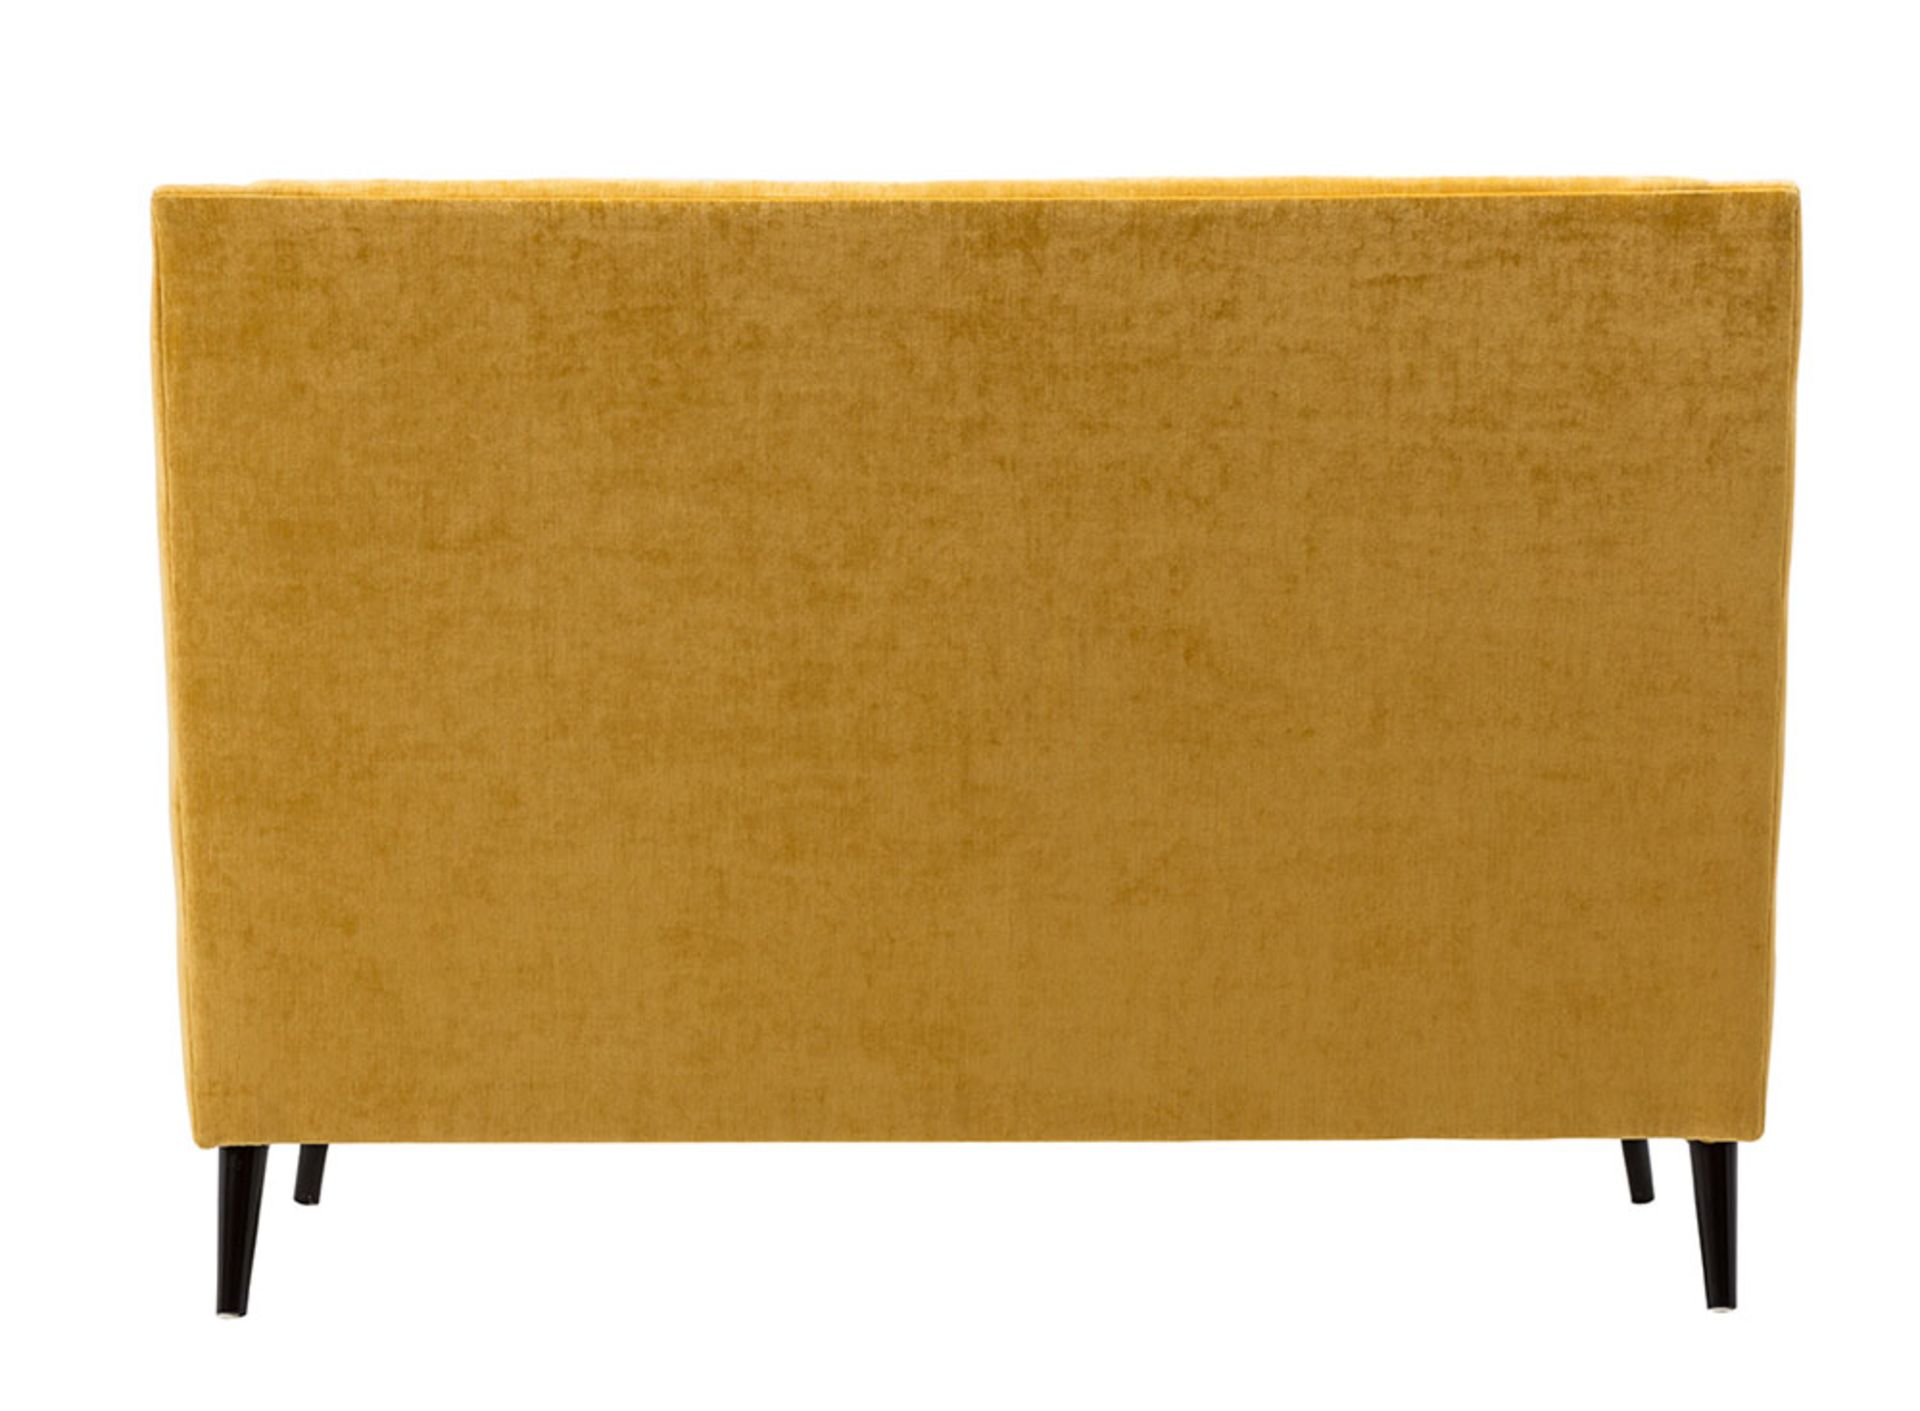 1 x Lauran Golden Sunflower Contemporary Sofa - RRP £1,029! - Image 2 of 5